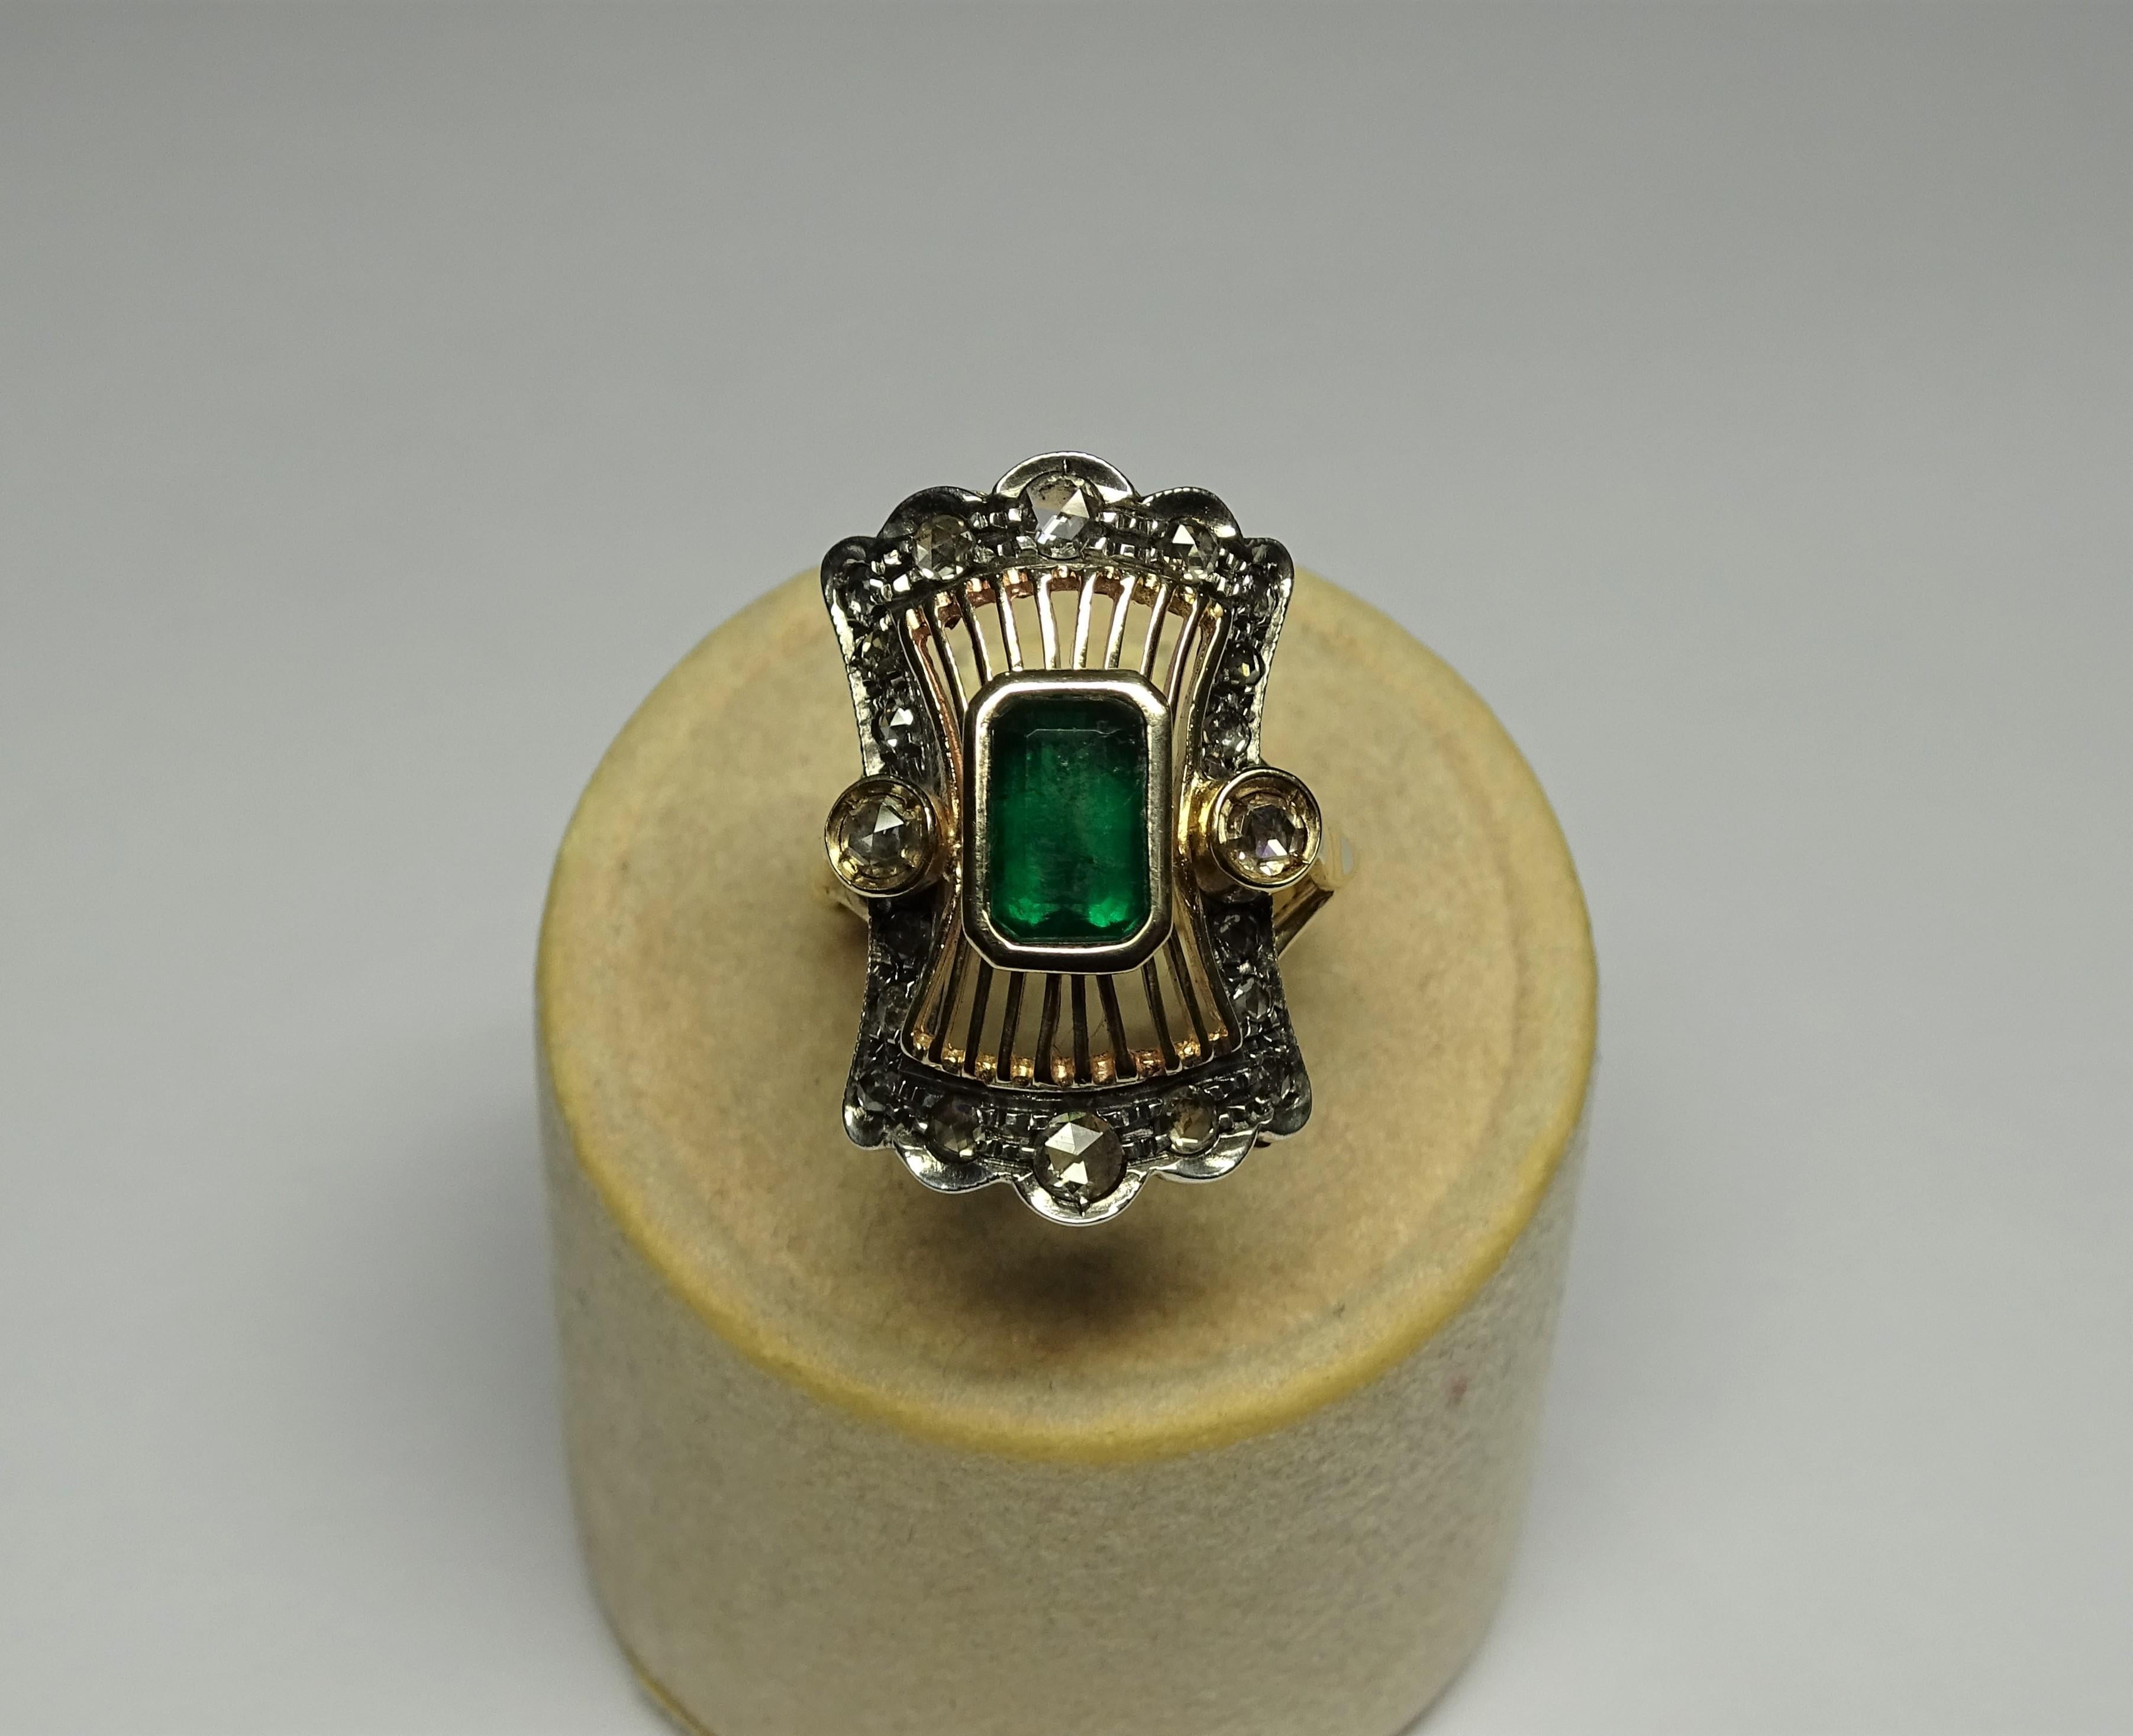 This Ring is made of 14K Yellow Gold and Sterling Silver.
This Ring has 0.90 Carats of Rose Cut Diamonds.
This Ring has 1.32 Carats of Natural Emerald.
This Ring is inspired by Art Nouveau.
Size ITA: 15.5 - Size USA: 7.5
We're a workshop so every